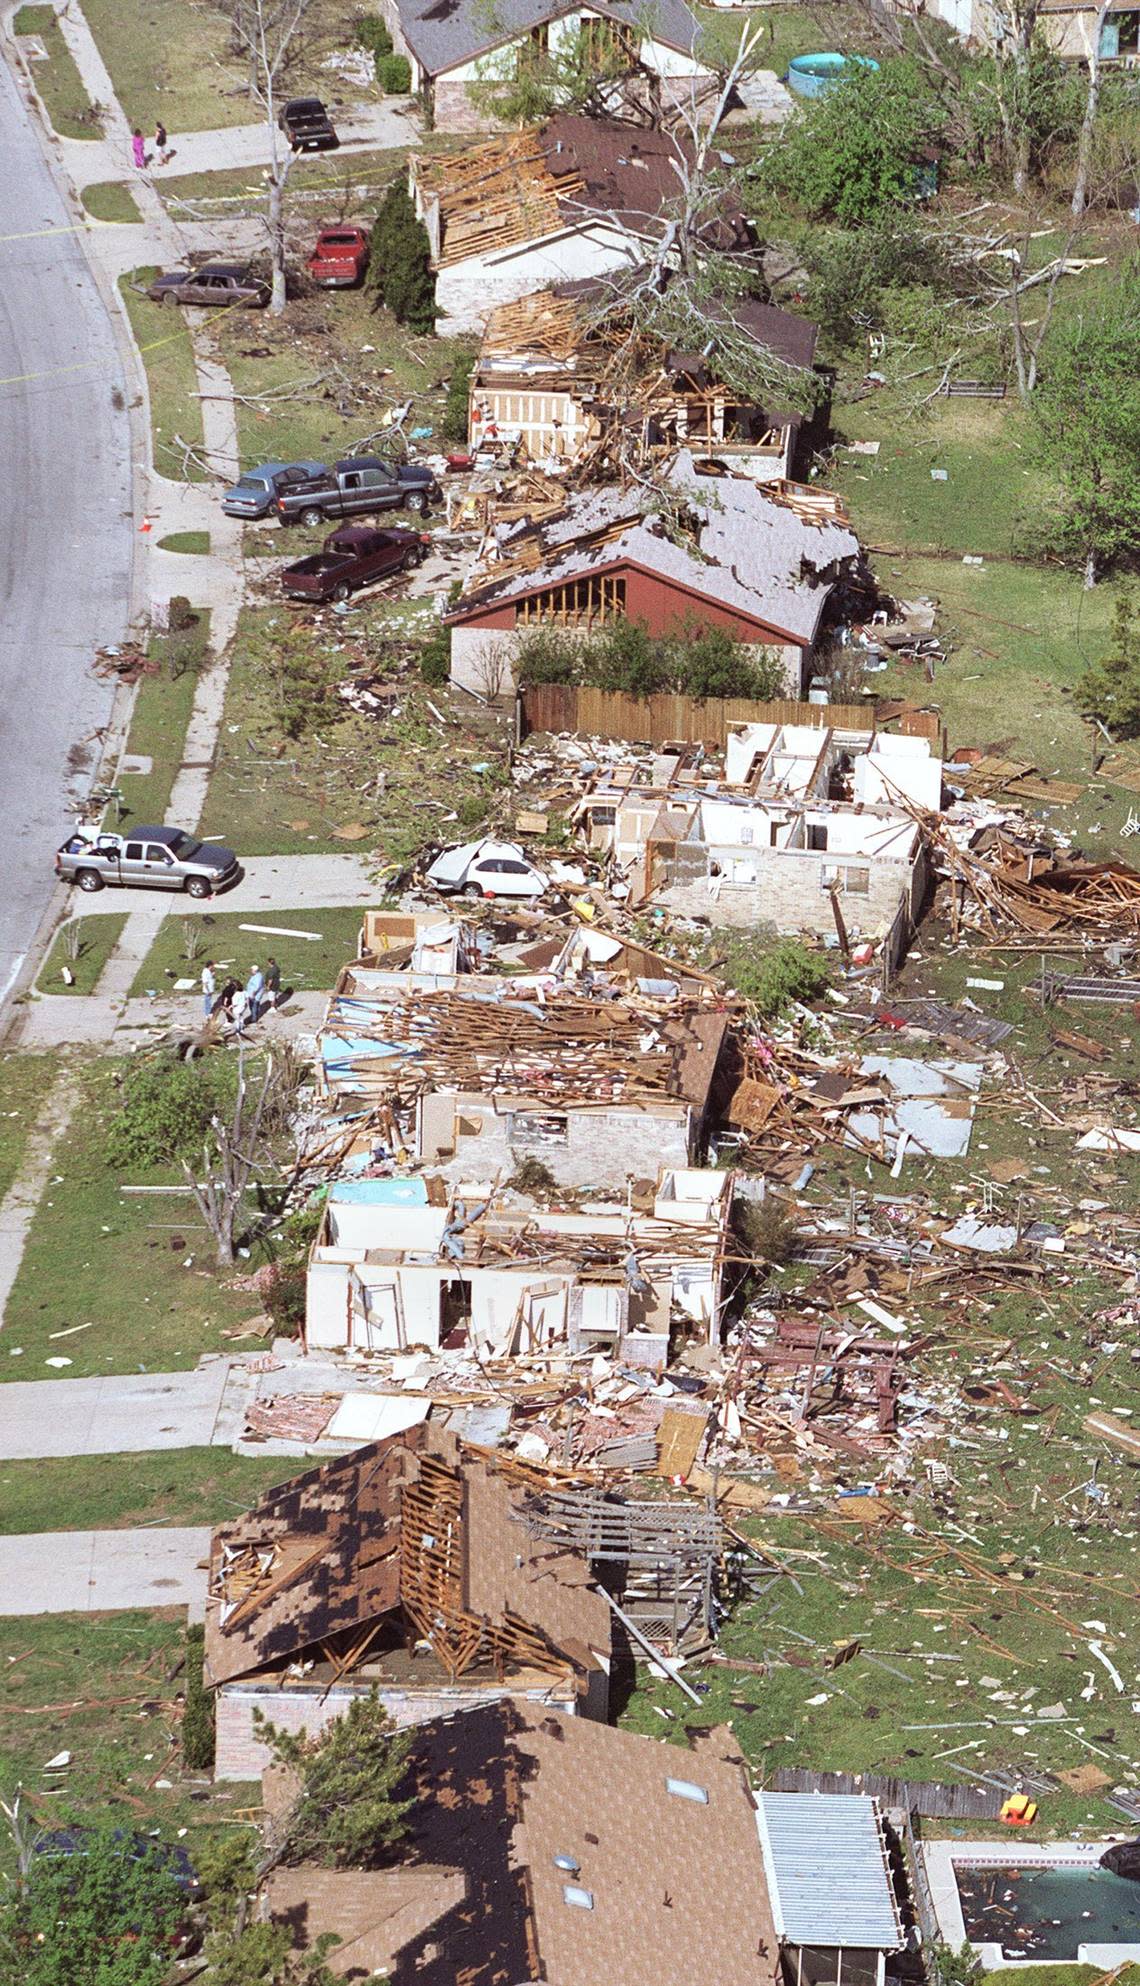 These Arlington homes on West Embercrest Drive, a block west of Matlock Road, appeared to be the first to be hit by a tornado on March 28, 2000.